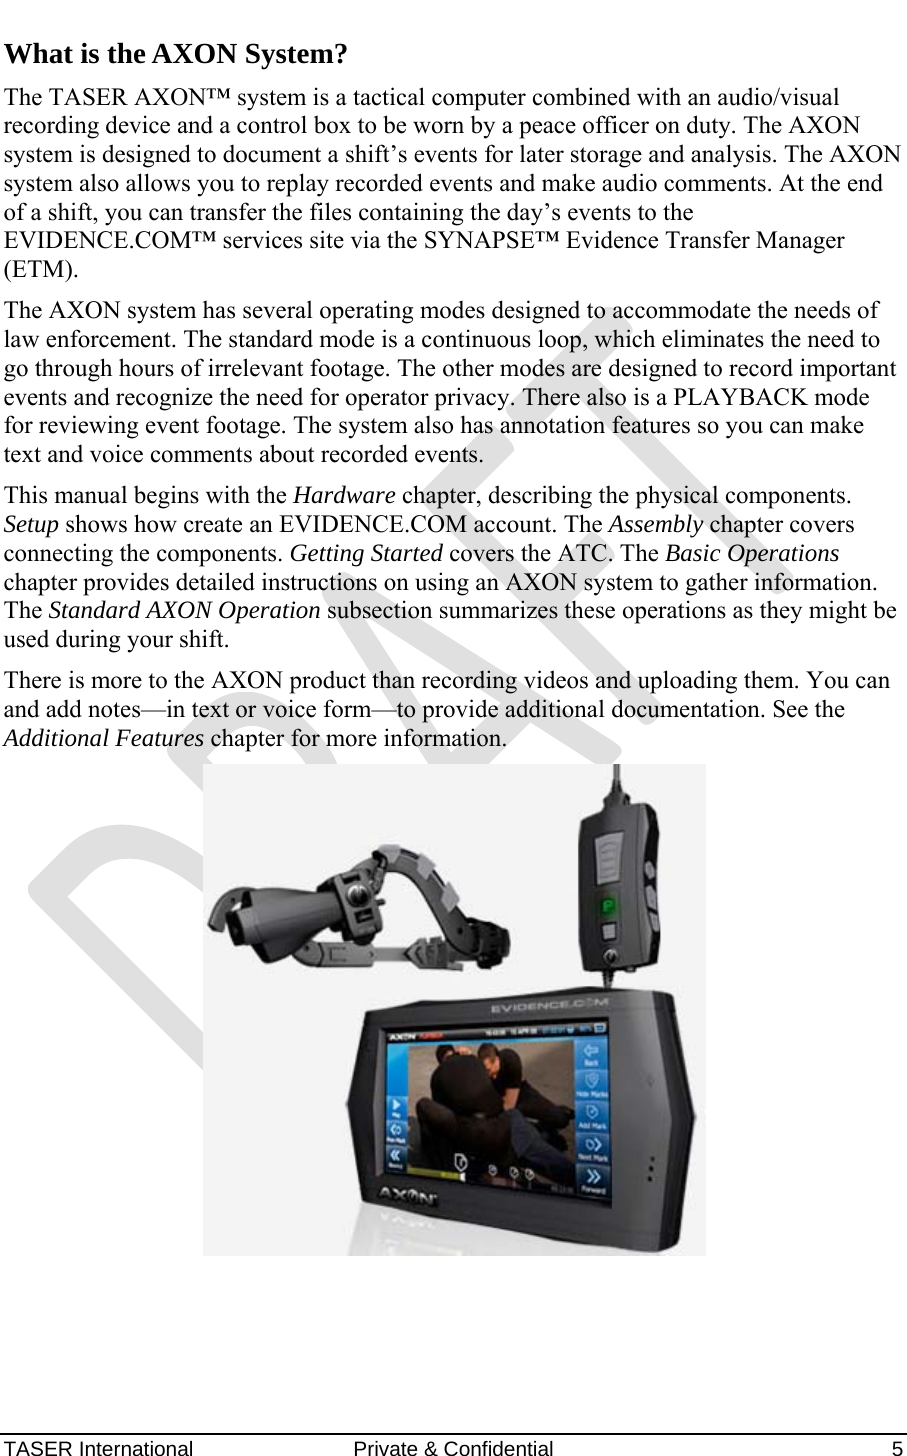 AXON™  4 Jan 2010 TASER International  Private &amp; Confidential    5 What is the AXON System? The TASER AXON™ system is a tactical computer combined with an audio/visual recording device and a control box to be worn by a peace officer on duty. The AXON system is designed to document a shift’s events for later storage and analysis. The AXON system also allows you to replay recorded events and make audio comments. At the end of a shift, you can transfer the files containing the day’s events to the EVIDENCE.COM™ services site via the SYNAPSE™ Evidence Transfer Manager (ETM). The AXON system has several operating modes designed to accommodate the needs of law enforcement. The standard mode is a continuous loop, which eliminates the need to go through hours of irrelevant footage. The other modes are designed to record important events and recognize the need for operator privacy. There also is a PLAYBACK mode for reviewing event footage. The system also has annotation features so you can make text and voice comments about recorded events. This manual begins with the Hardware chapter, describing the physical components. Setup shows how create an EVIDENCE.COM account. The Assembly chapter covers connecting the components. Getting Started covers the ATC. The Basic Operations chapter provides detailed instructions on using an AXON system to gather information. The Standard AXON Operation subsection summarizes these operations as they might be used during your shift. There is more to the AXON product than recording videos and uploading them. You can and add notes—in text or voice form—to provide additional documentation. See the Additional Features chapter for more information.  